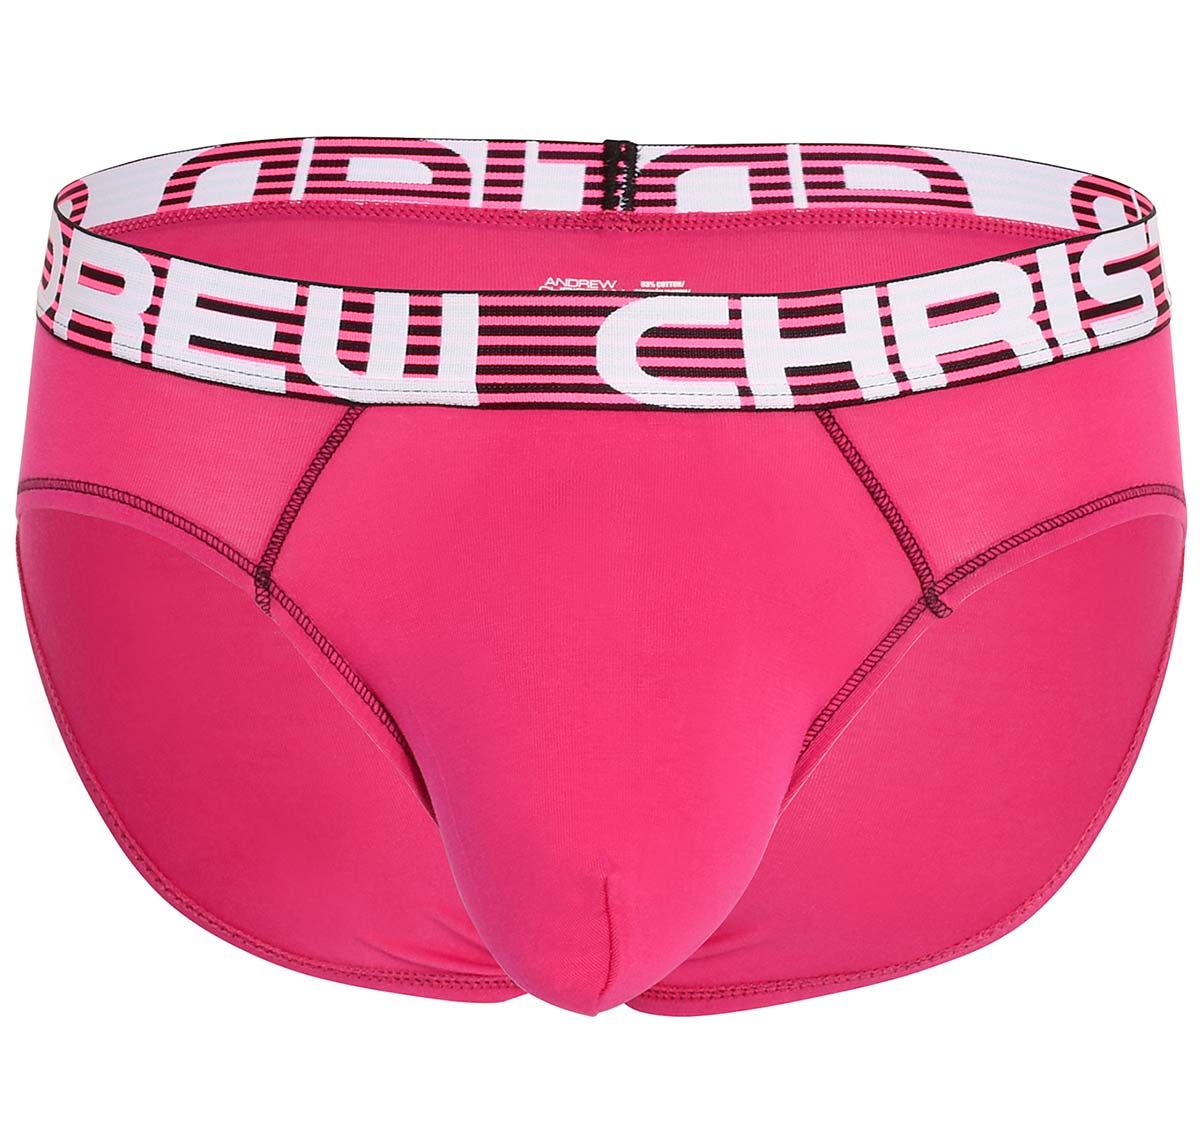 Andrew Christian Slip ALMOST NAKED COTTON BRIEF 92584, fucsia